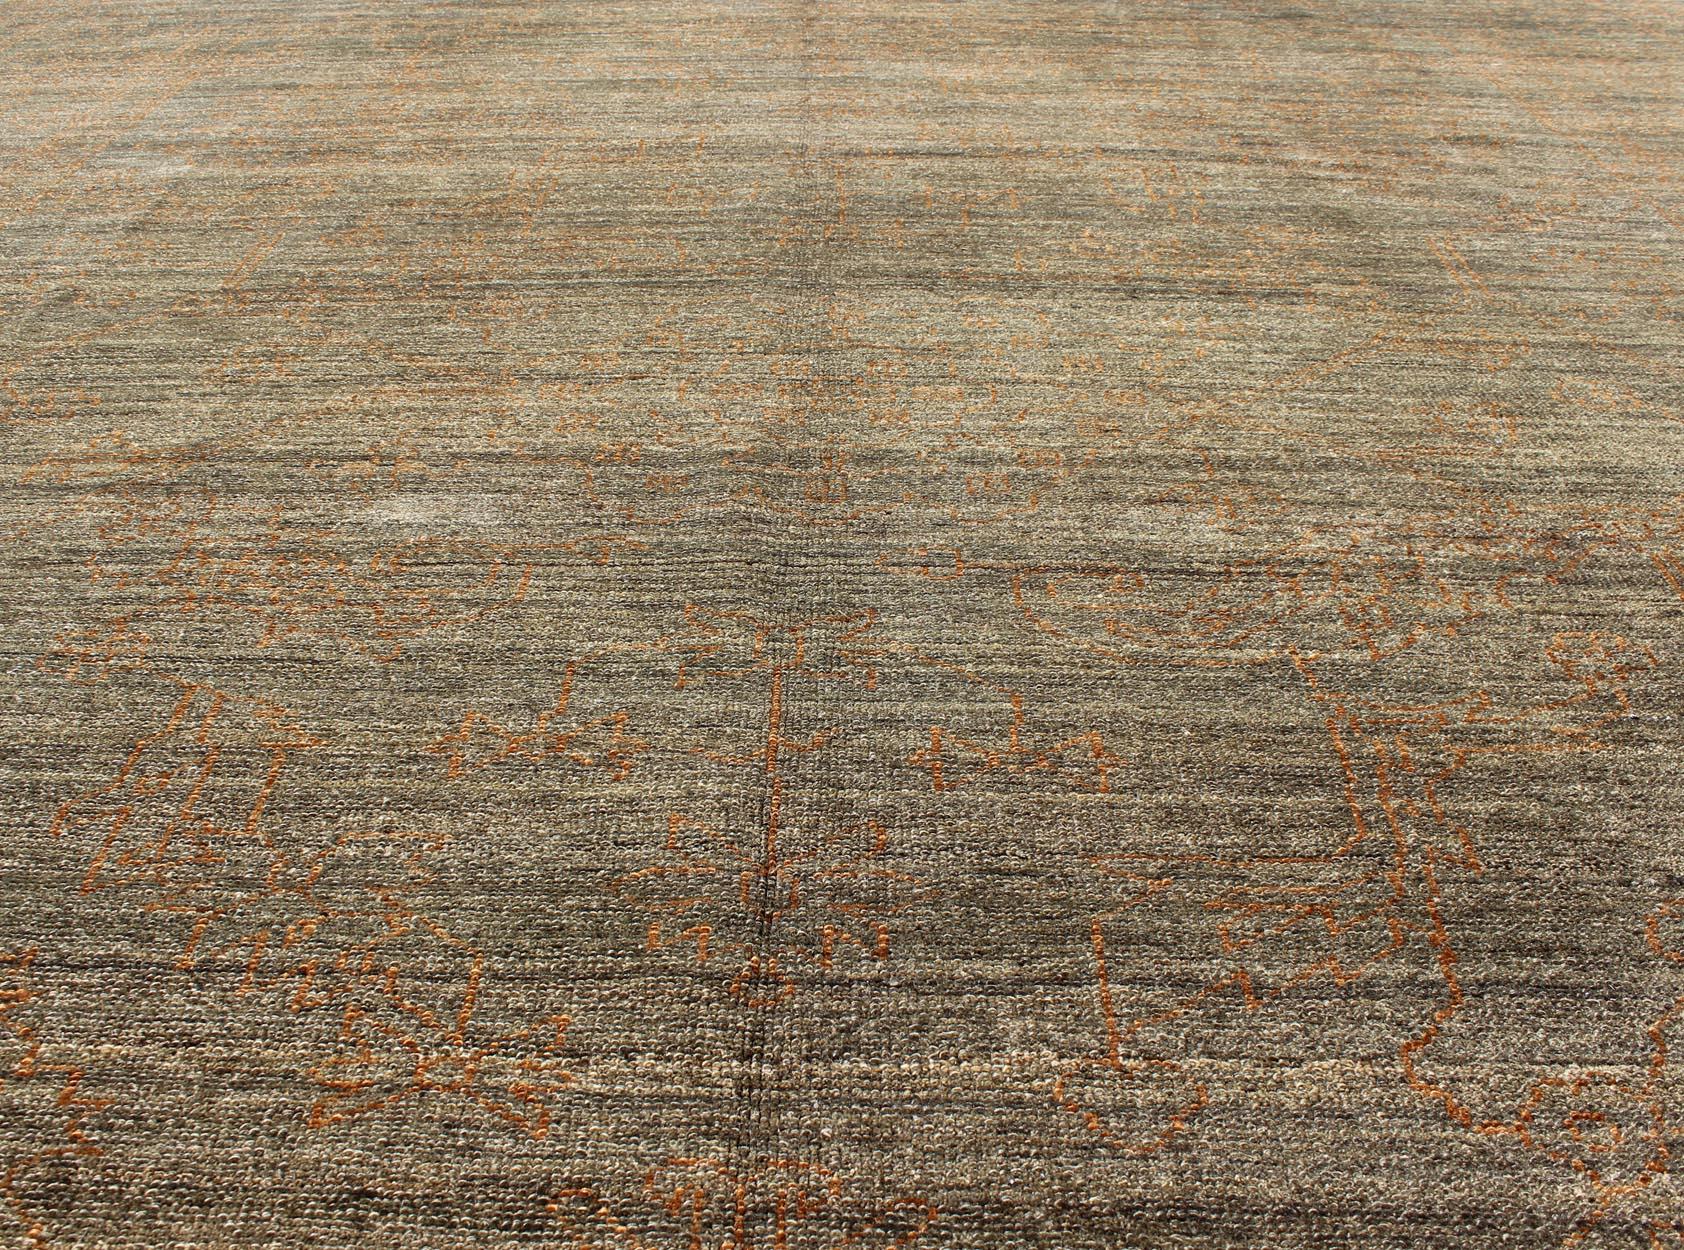 Fine Modern Rug with Transitional Design in Gray Green & Goldish Orange In Excellent Condition For Sale In Atlanta, GA